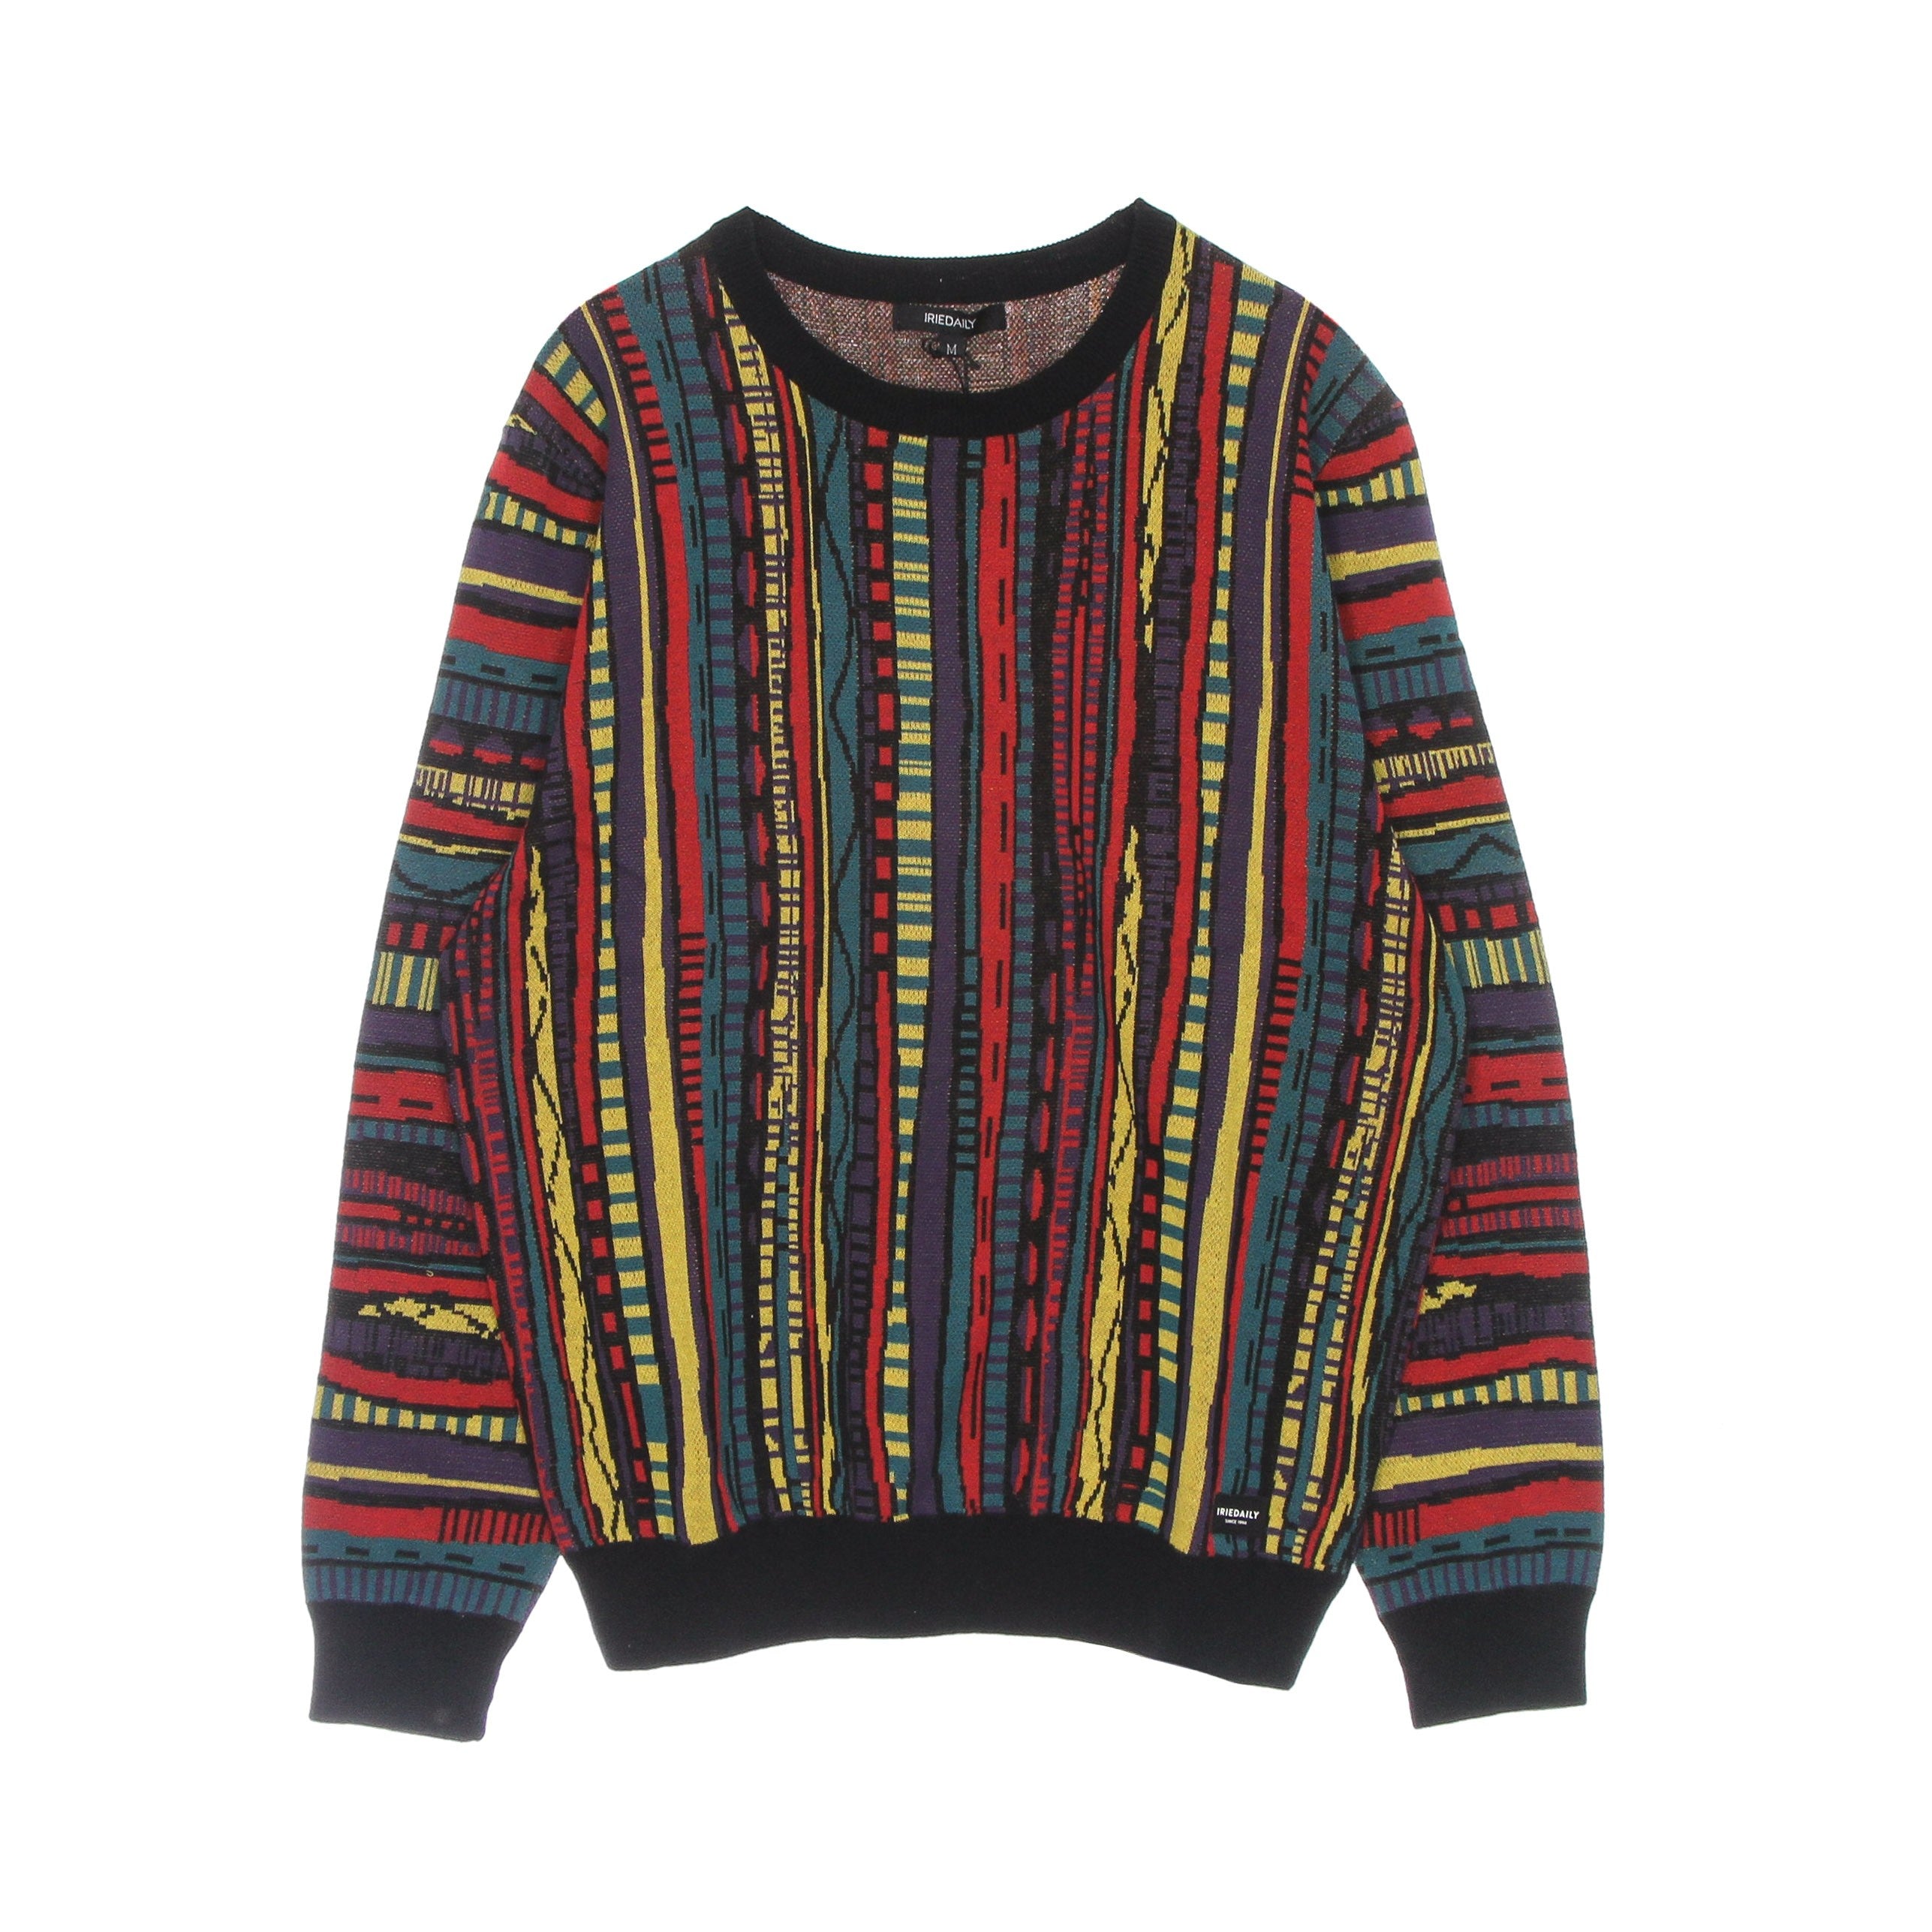 Theodore Summer Knit Colored Men's Sweater